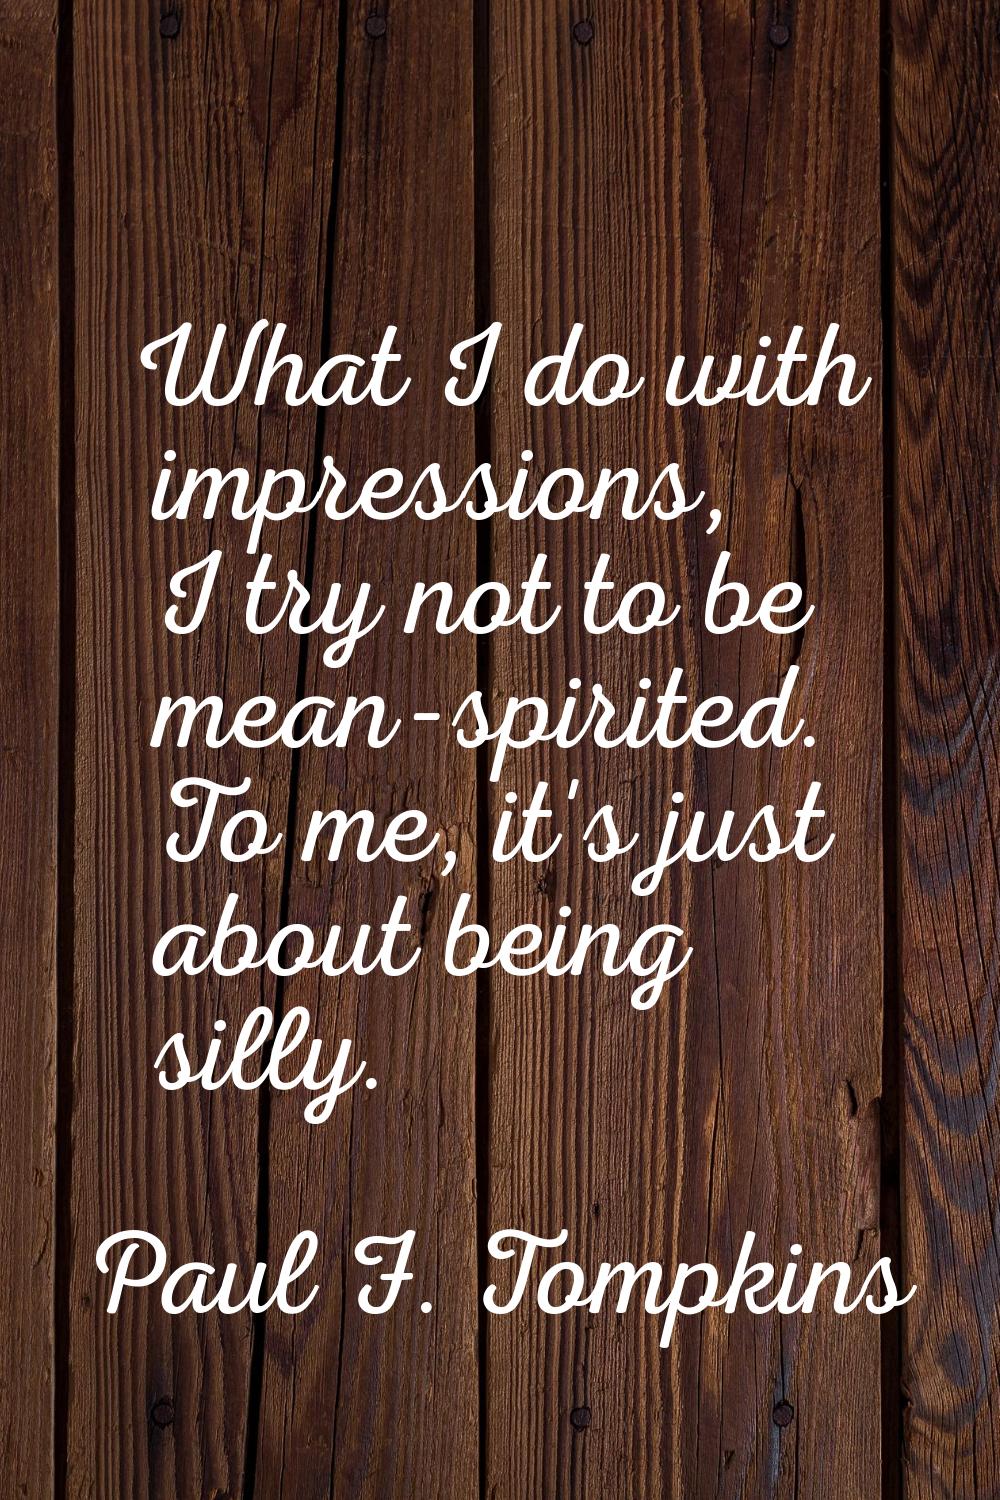 What I do with impressions, I try not to be mean-spirited. To me, it's just about being silly.